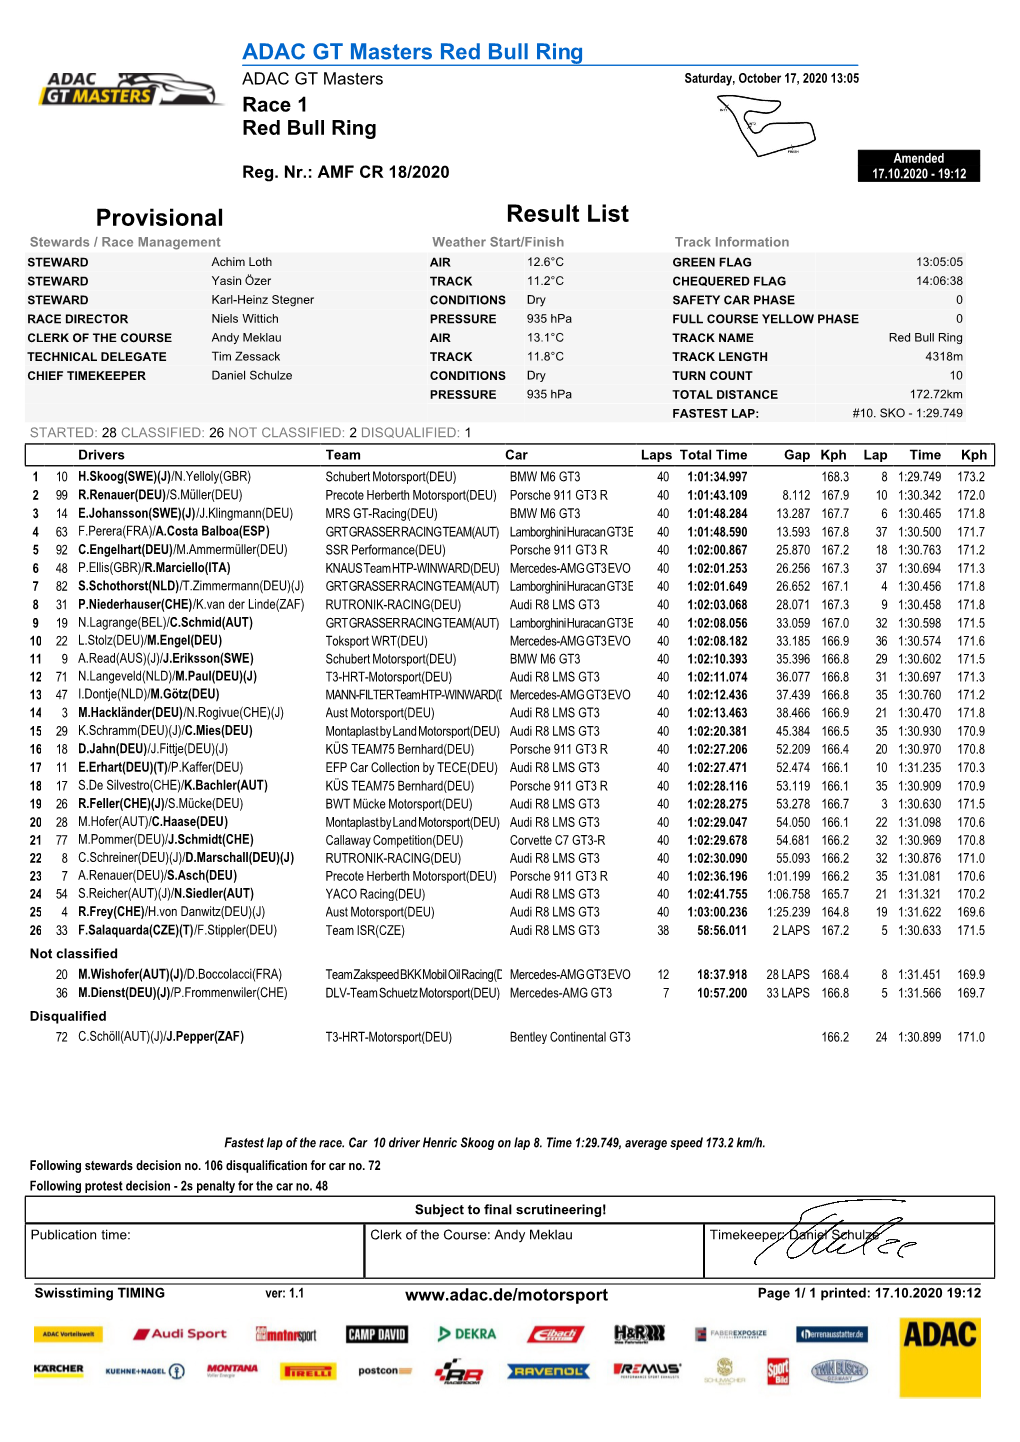 Race 1 Result